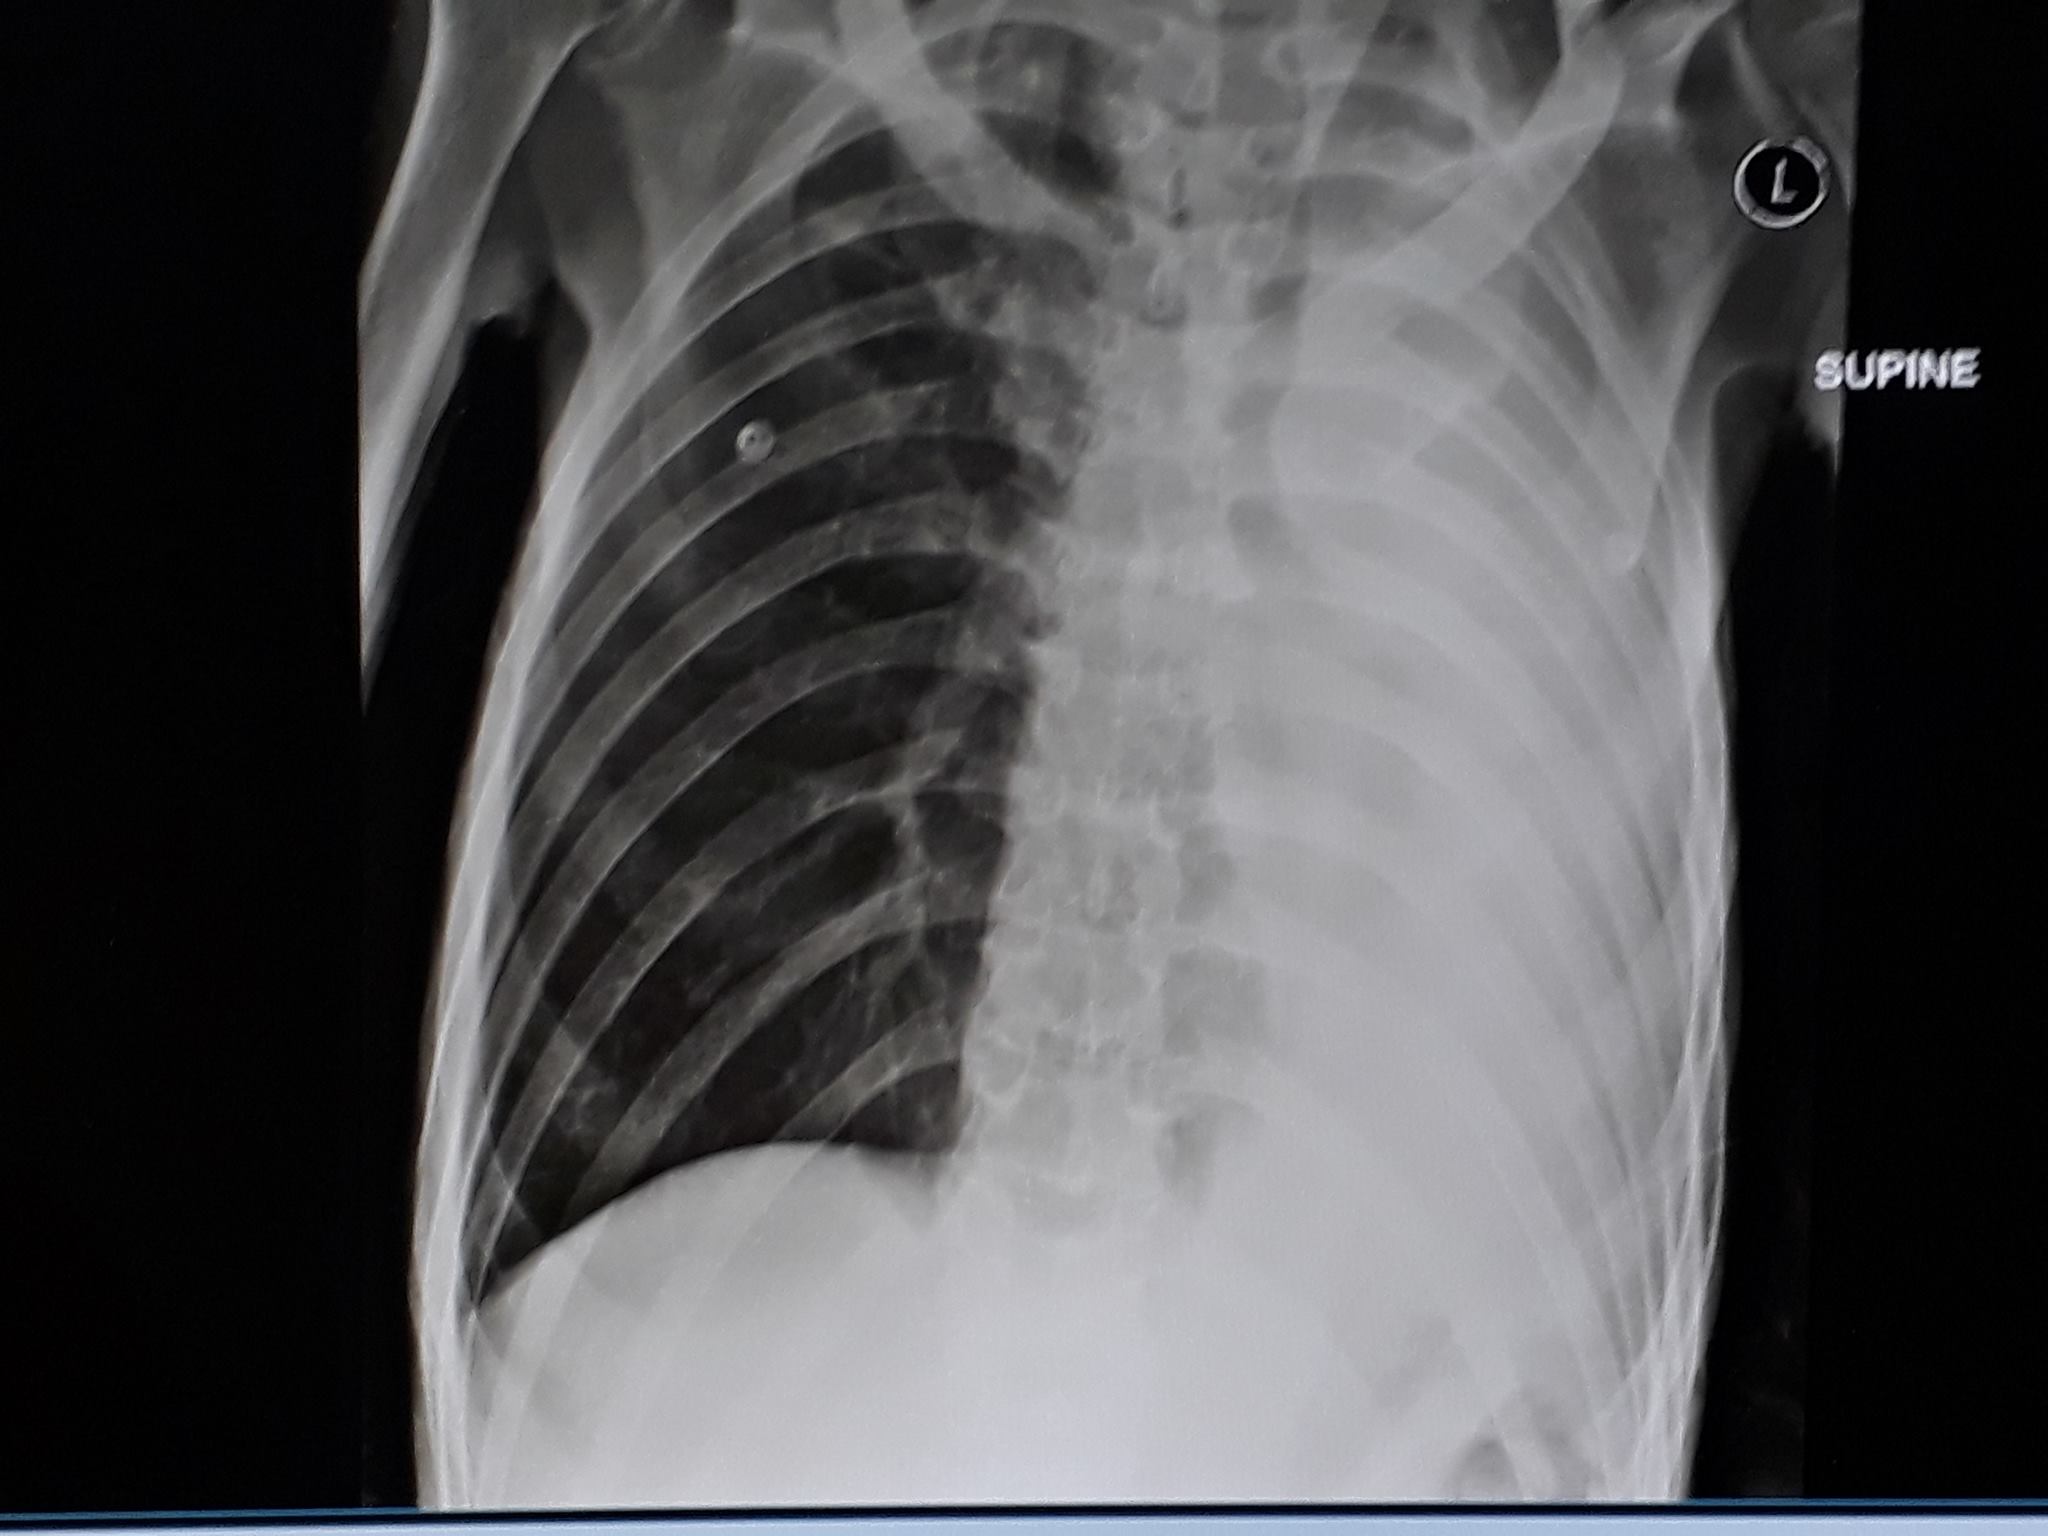 A different chest xray of severe lung damage after repeated bouts of Tuberculosis. The struggle is real.&nbsp;